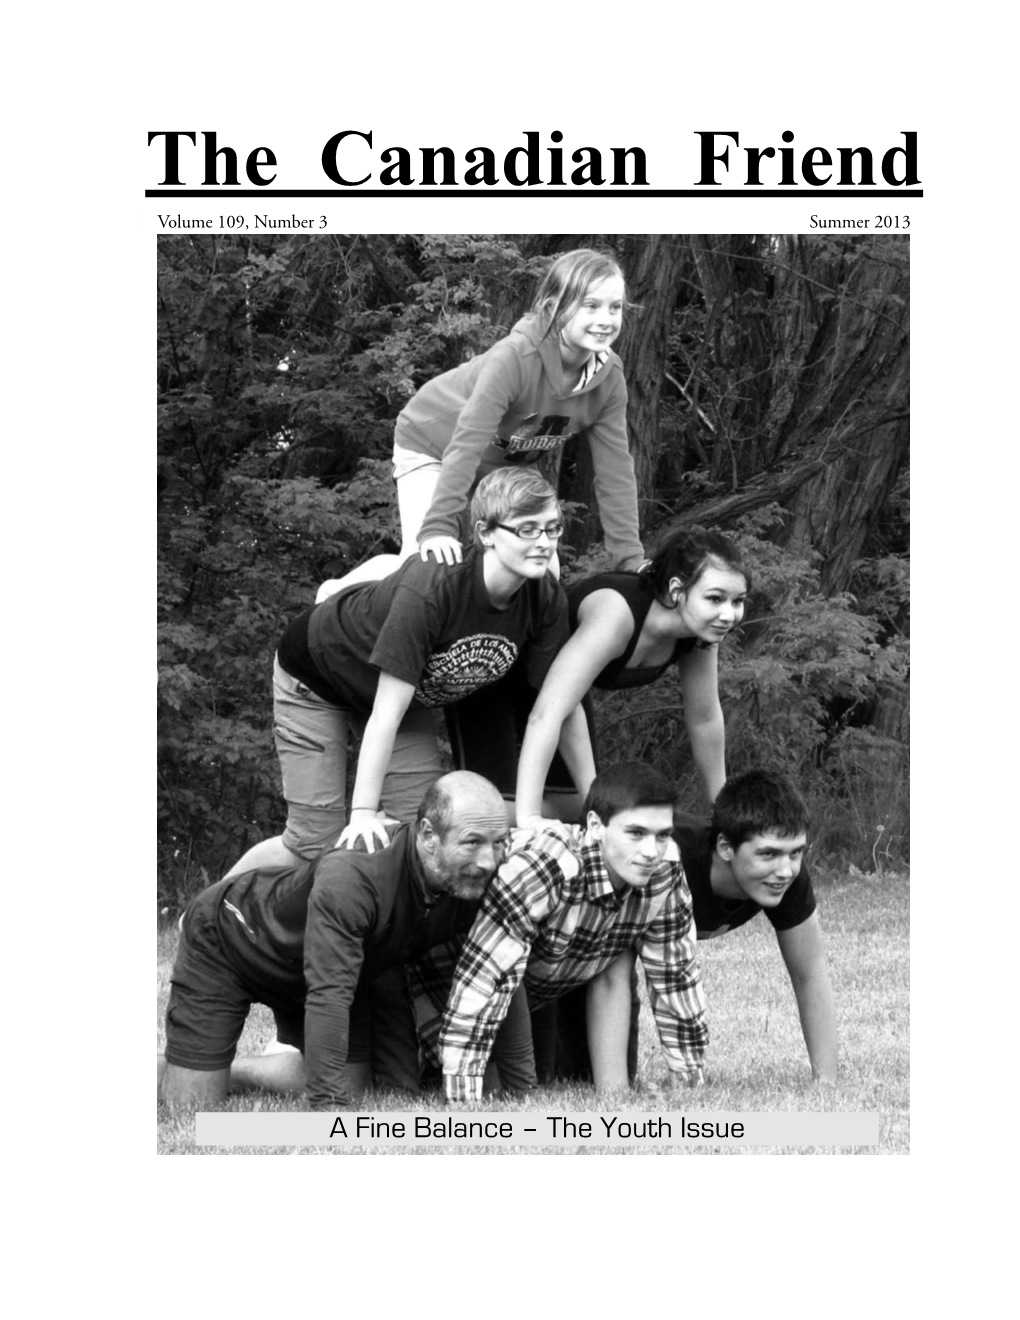 The Canadian Friend Volume 109, Number 3 Summer 2013